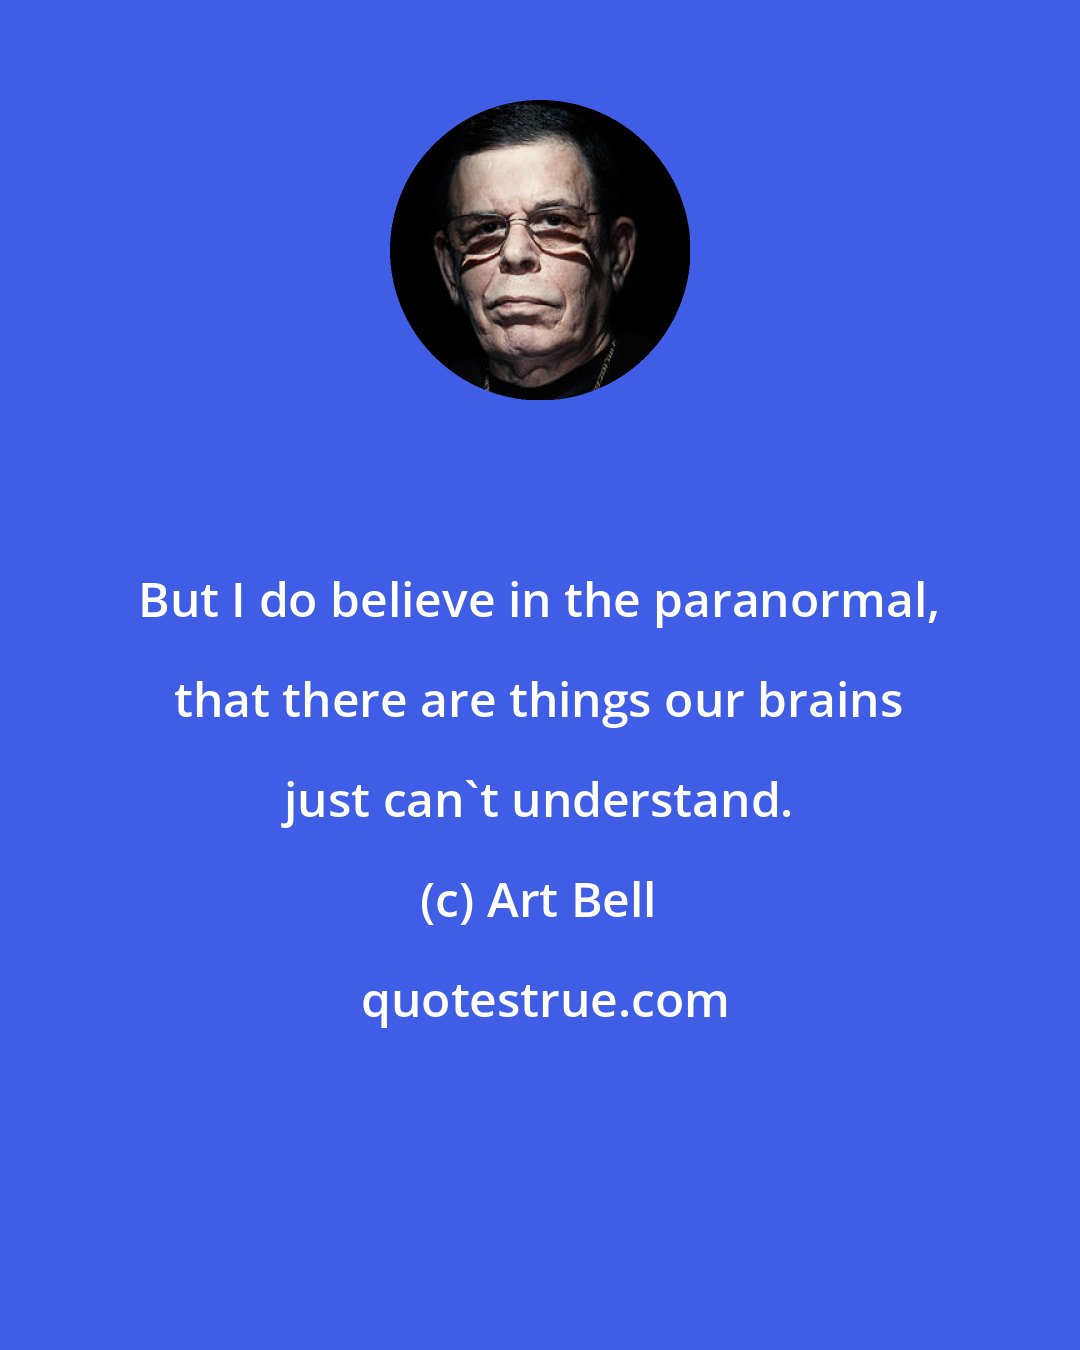 Art Bell: But I do believe in the paranormal, that there are things our brains just can't understand.